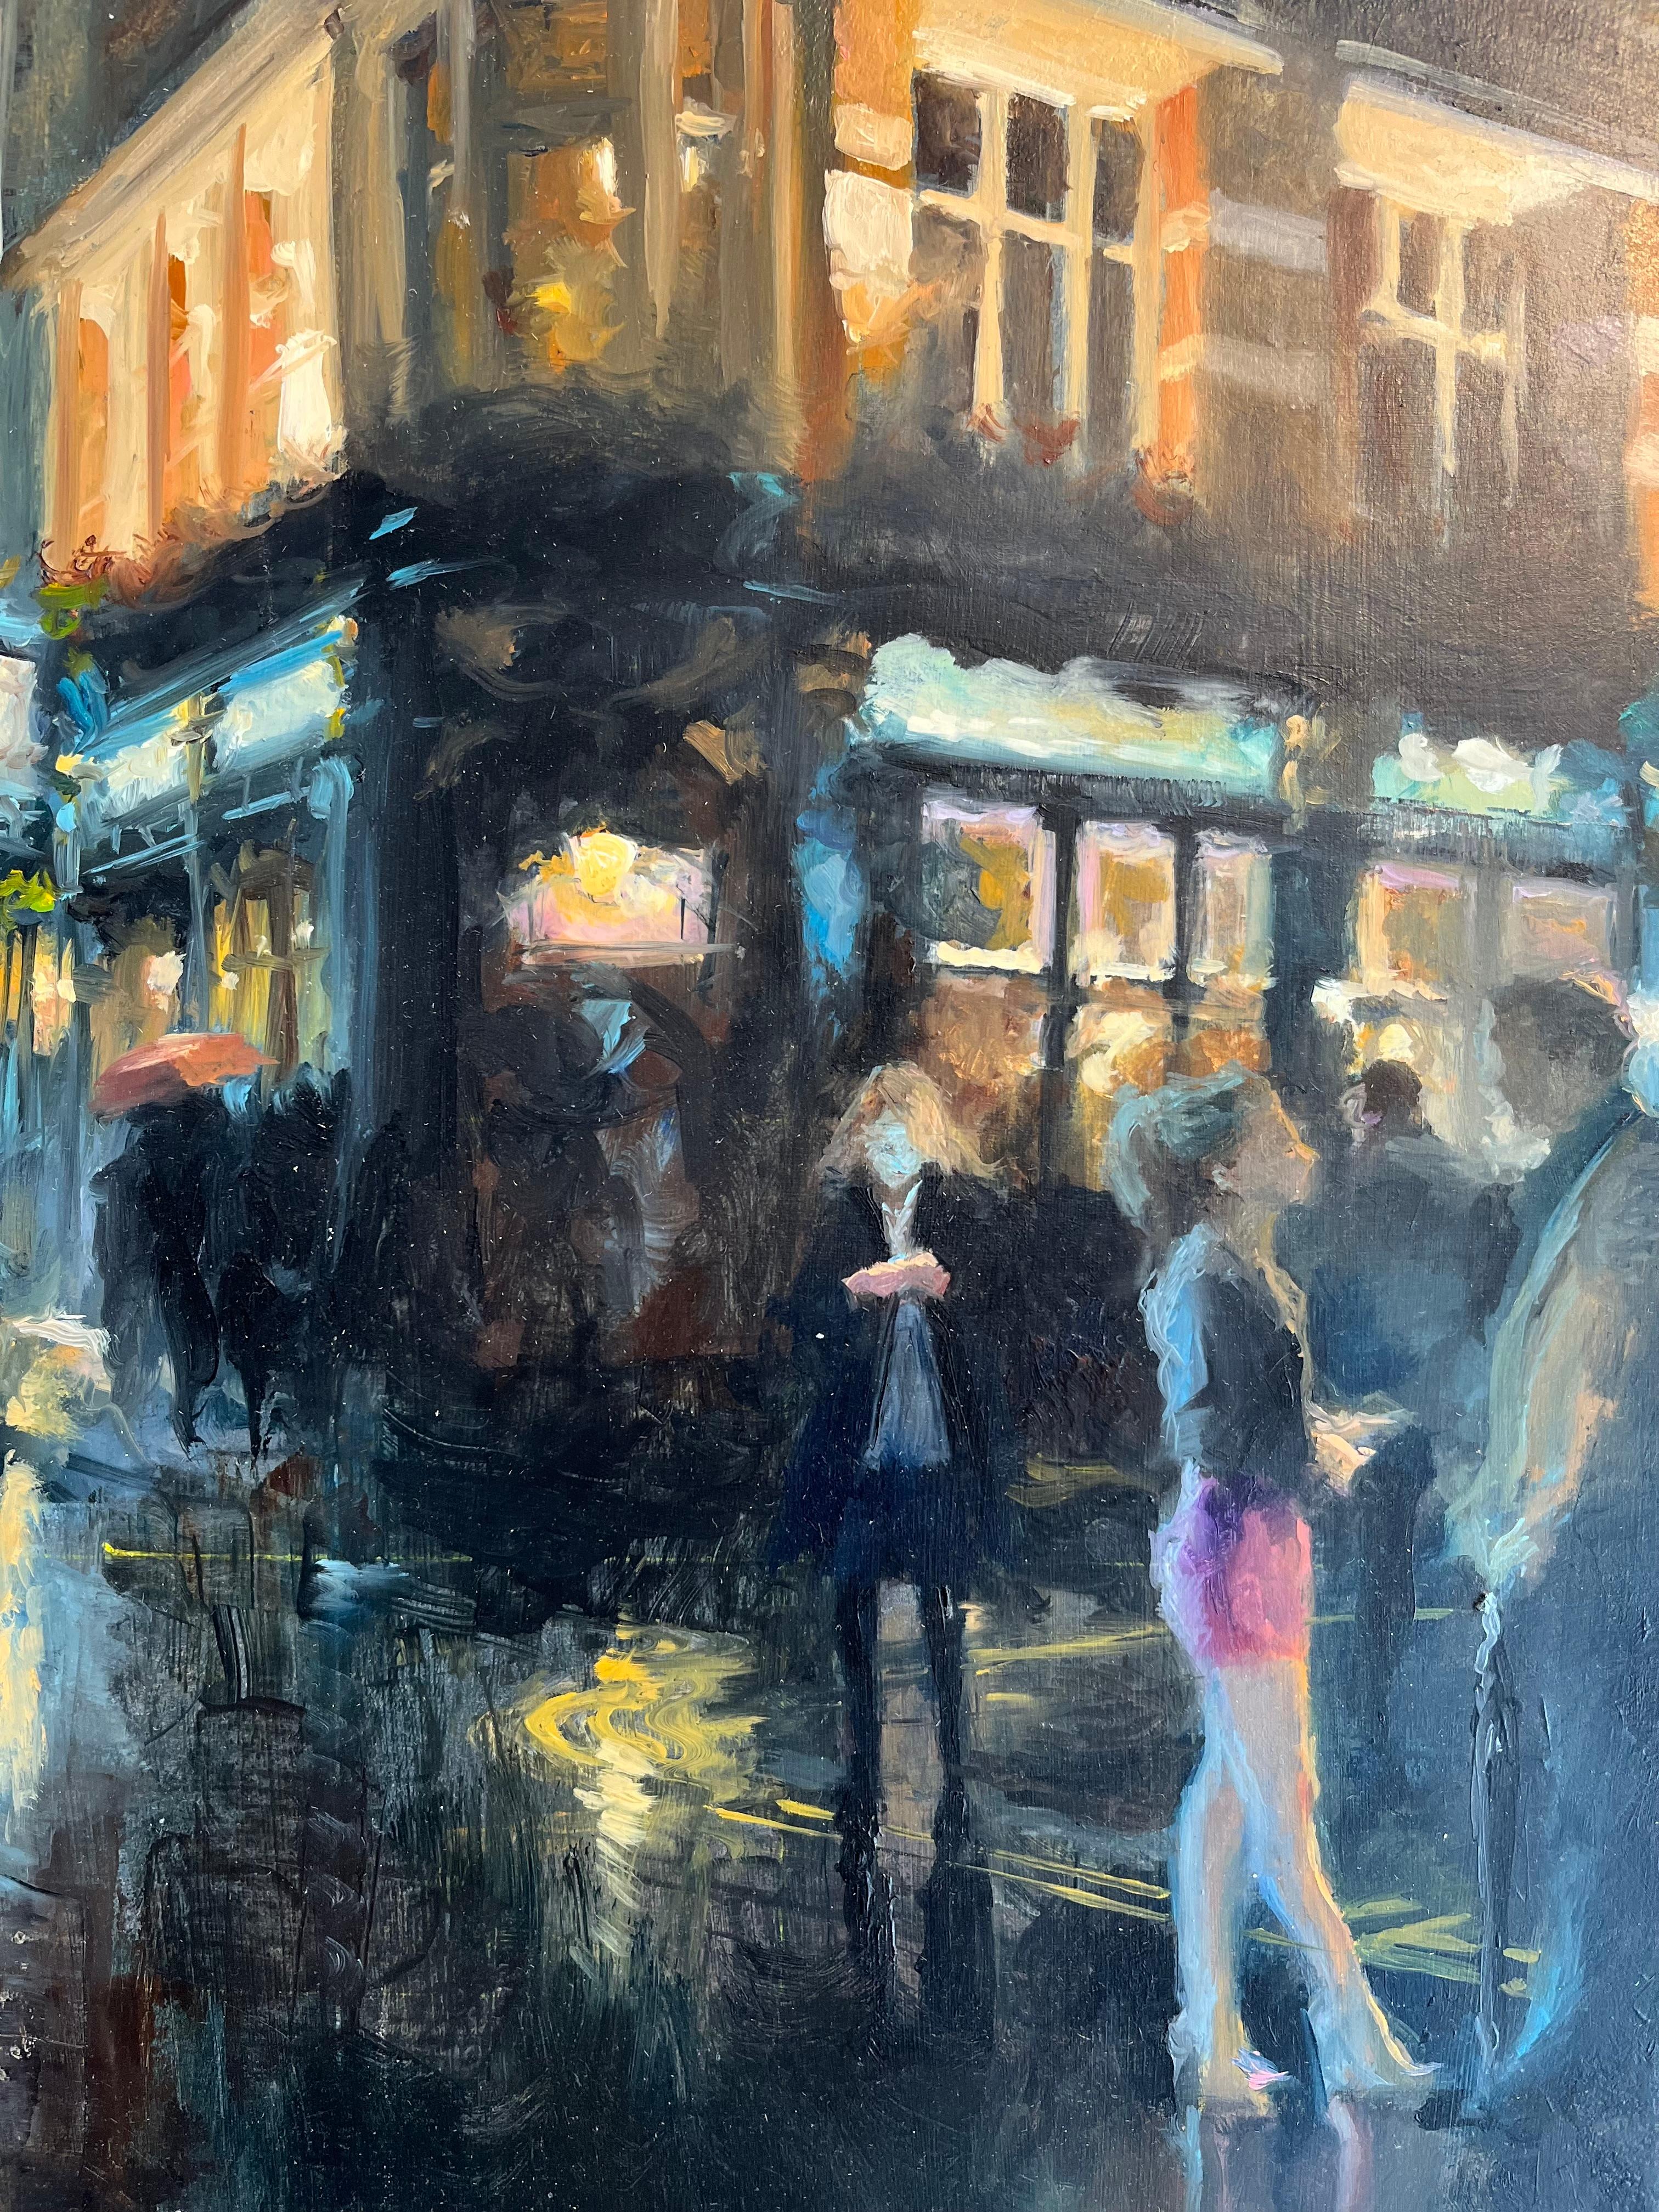 If on a Winters Night I-original impressionism London cityscape oil painting-Art - Impressionist Painting by Michael Alford